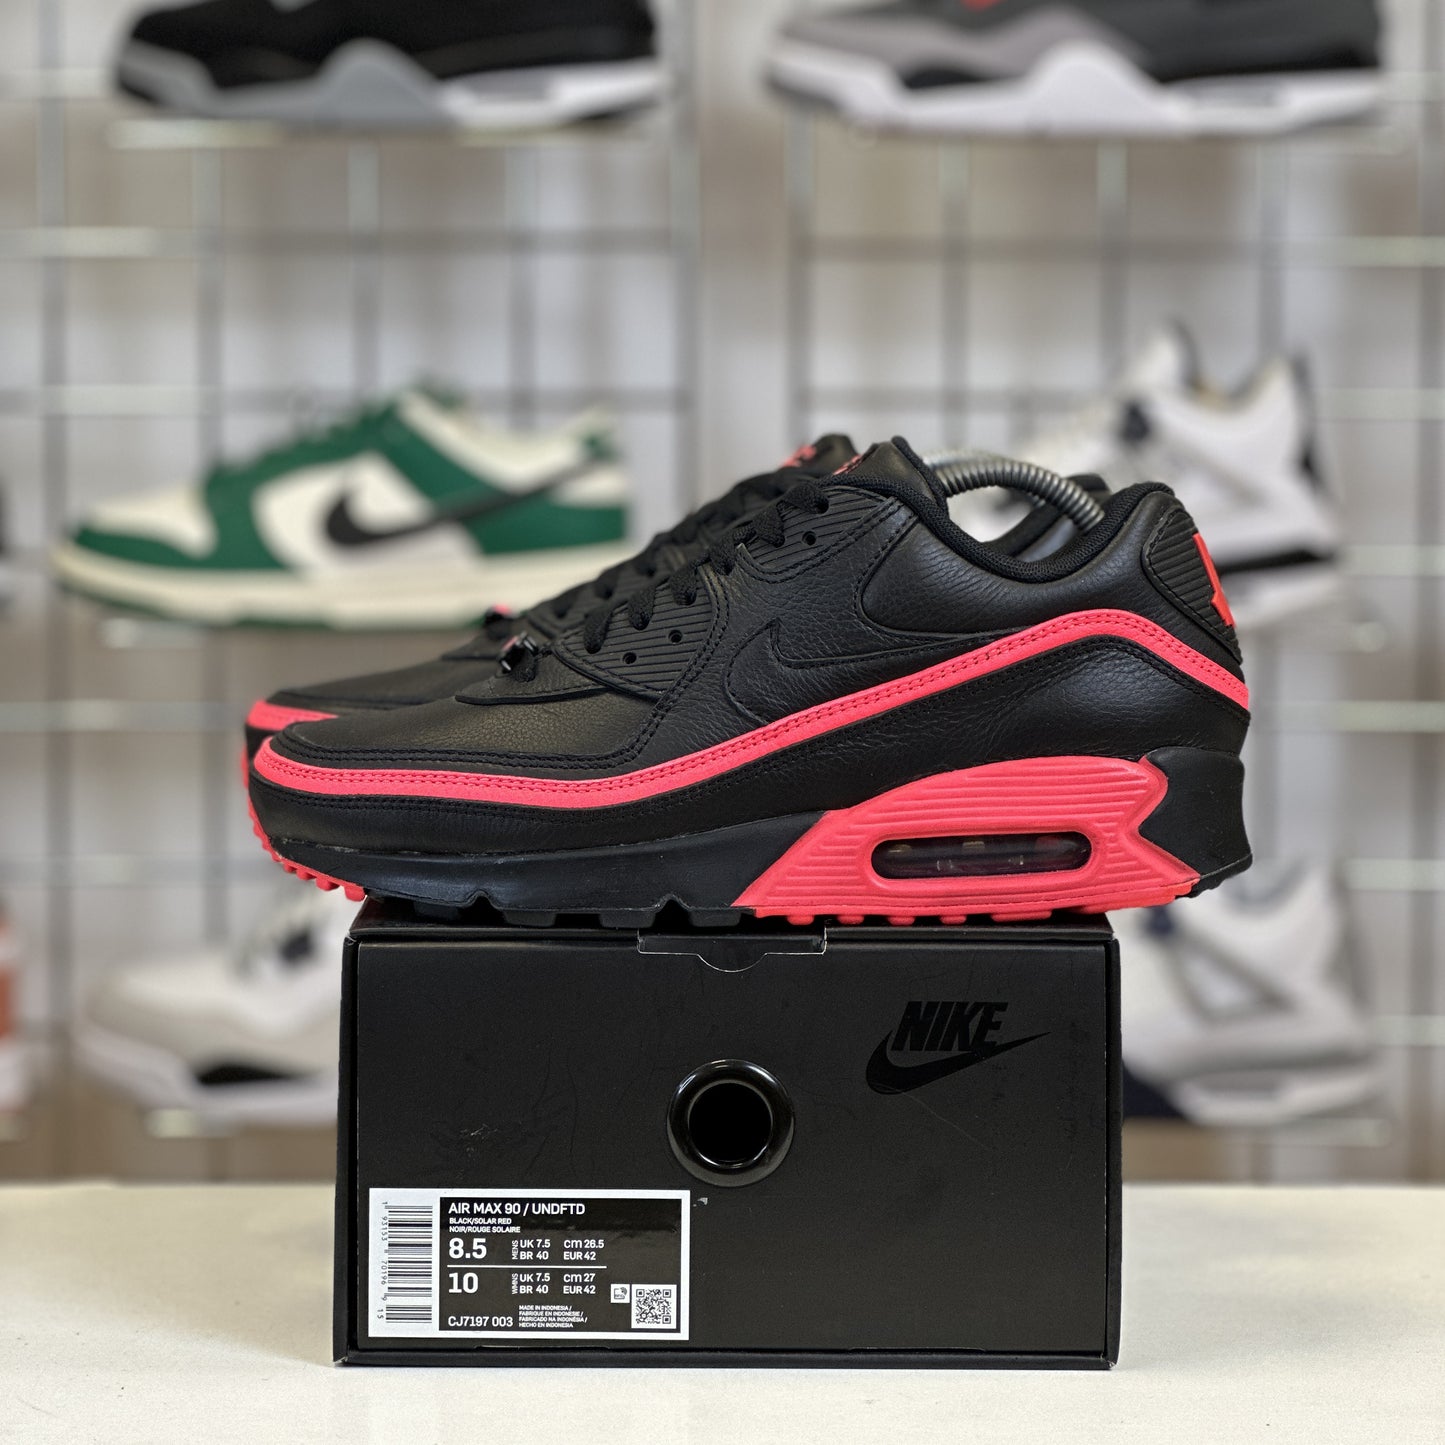 Nike Air Max 90 Undefeated 'Black Solar Red' UK7.5